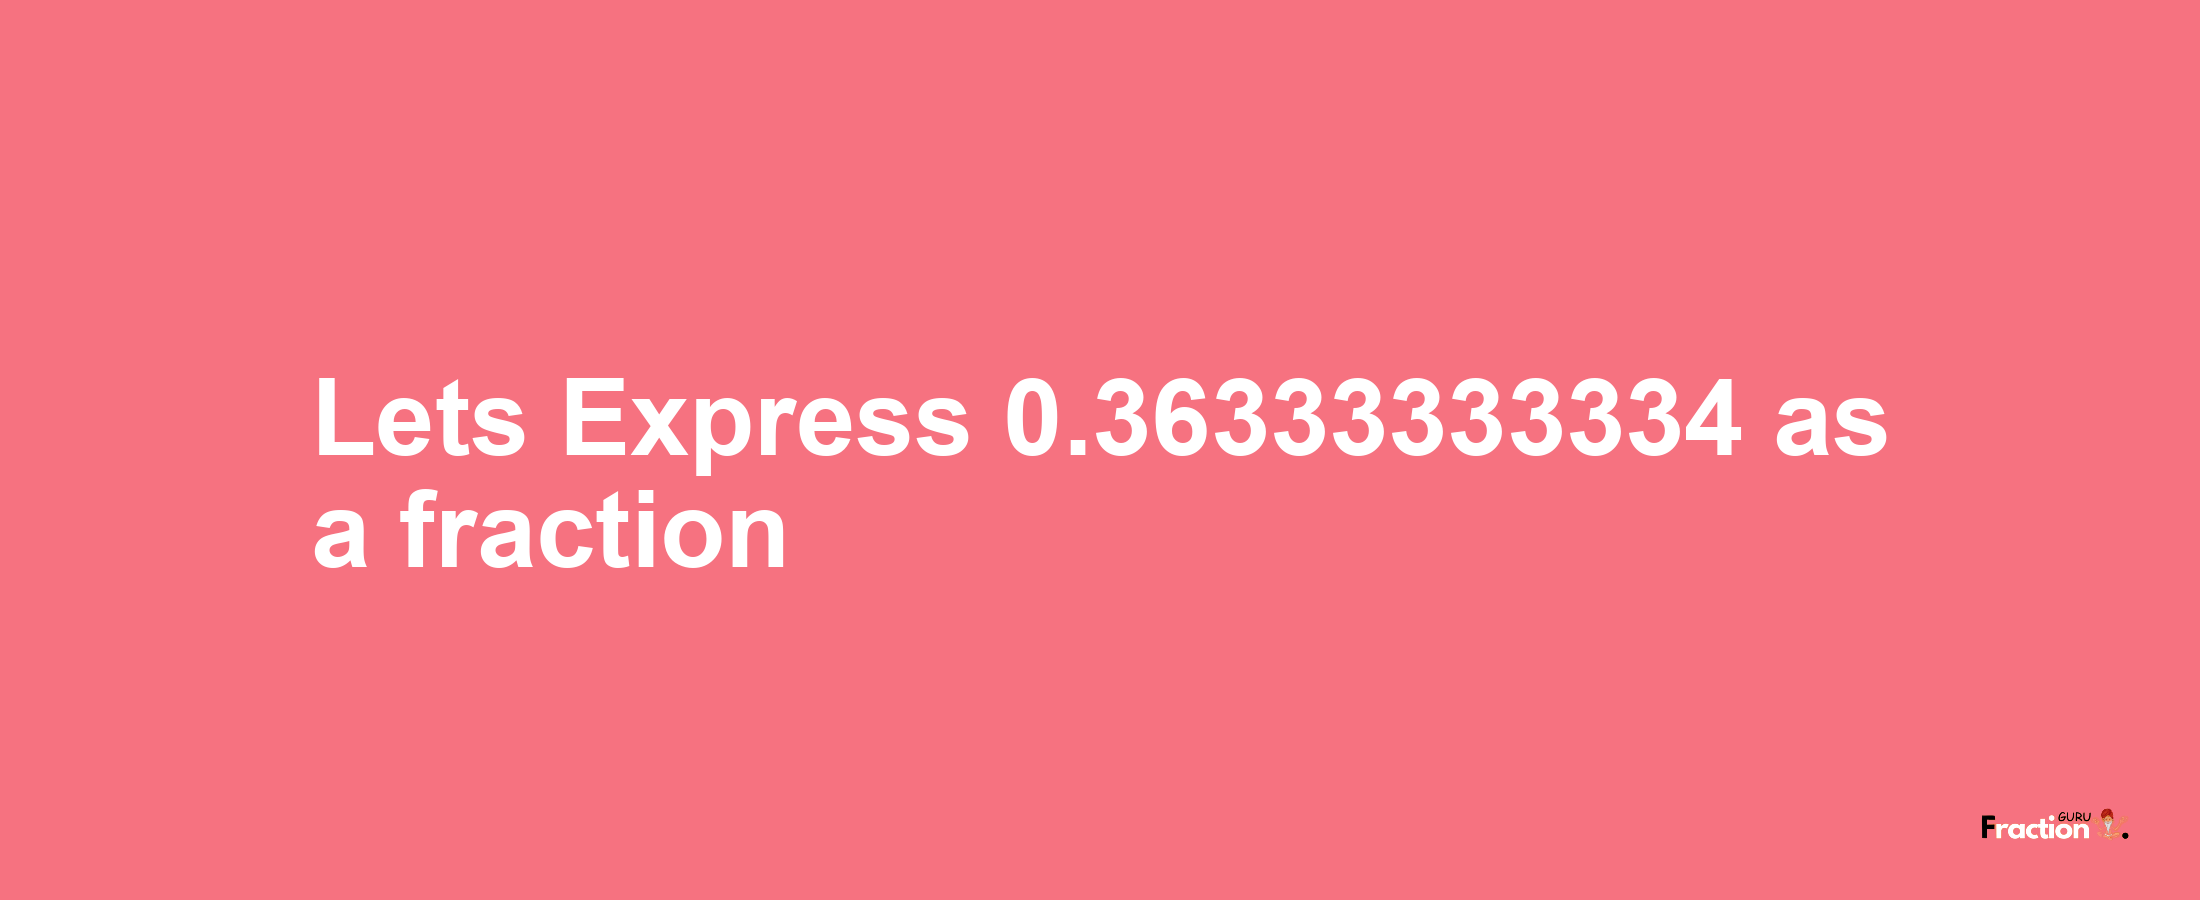 Lets Express 0.36333333334 as afraction